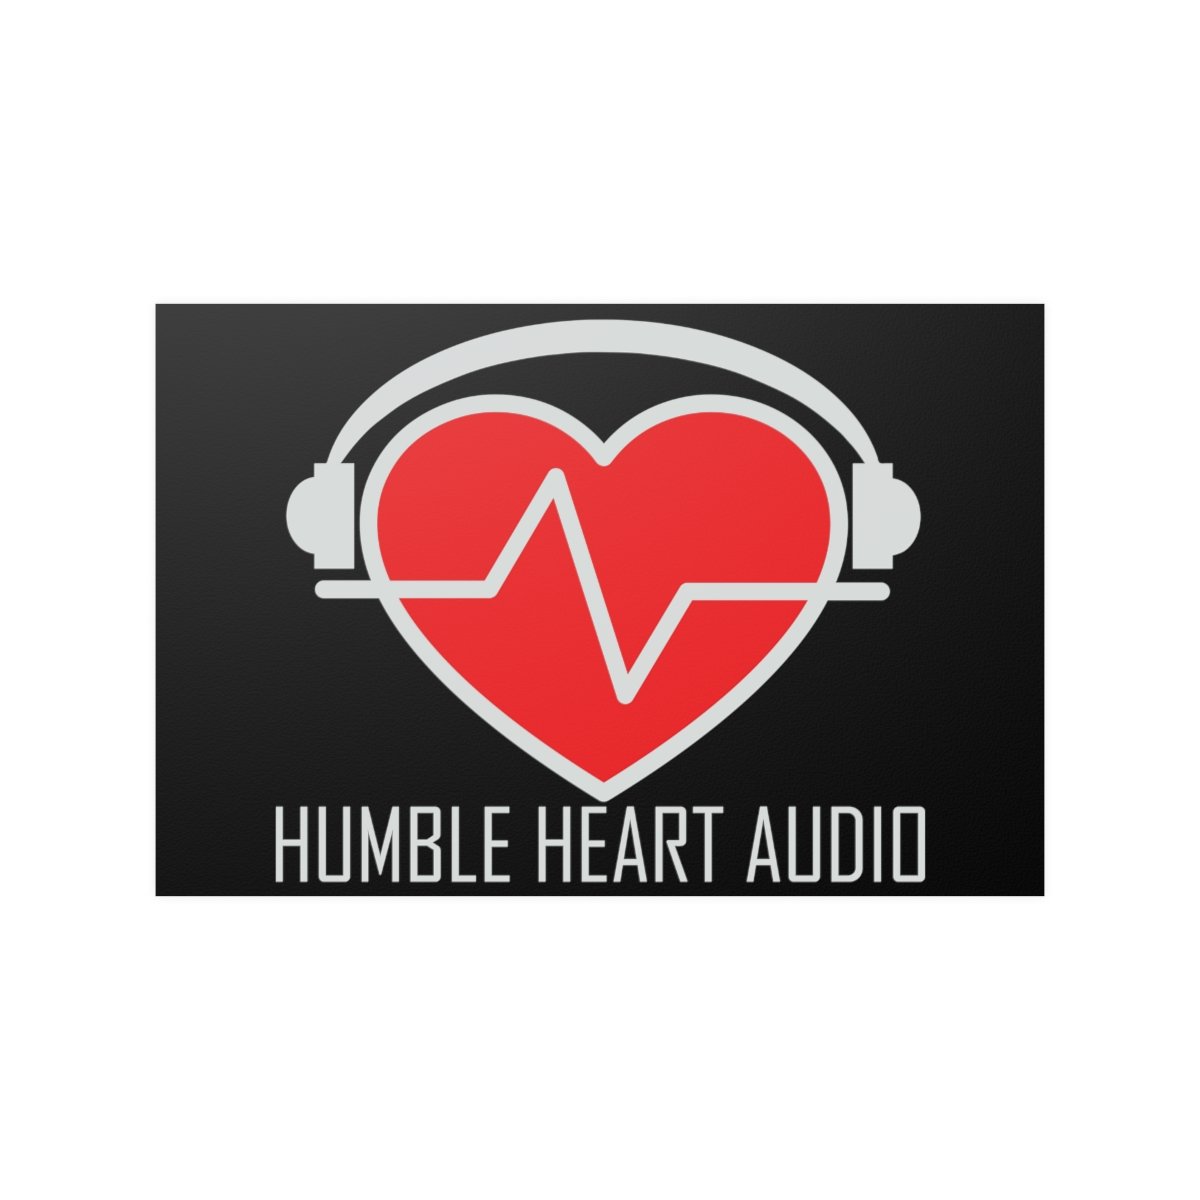 Humble Heart Audio Posters